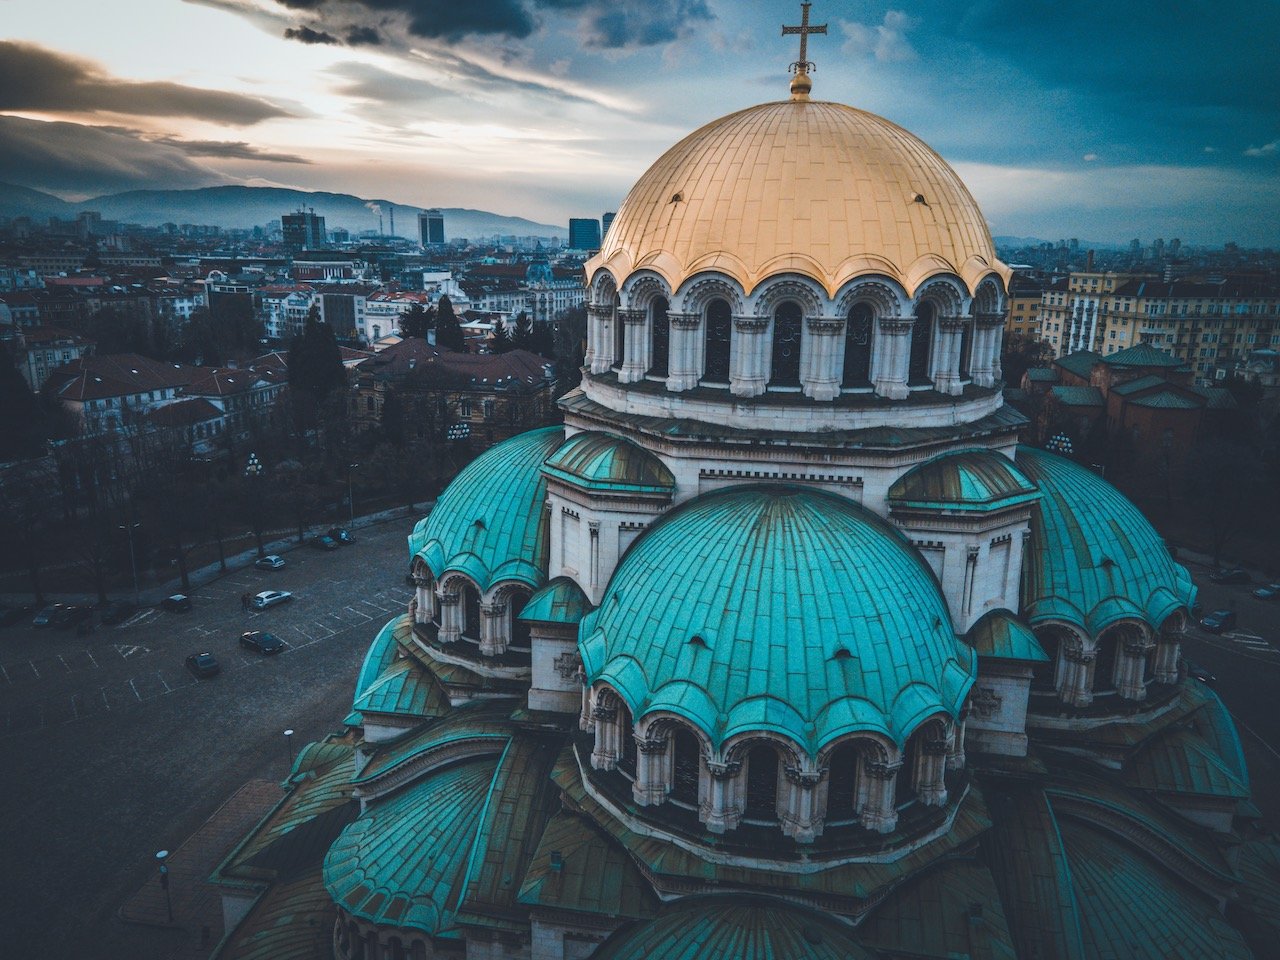   Alexander Nevsky Cathedral, Sofia, Bulgaria (ISO 200, 4.5 mm,  f /2.8, 1/15 s)  